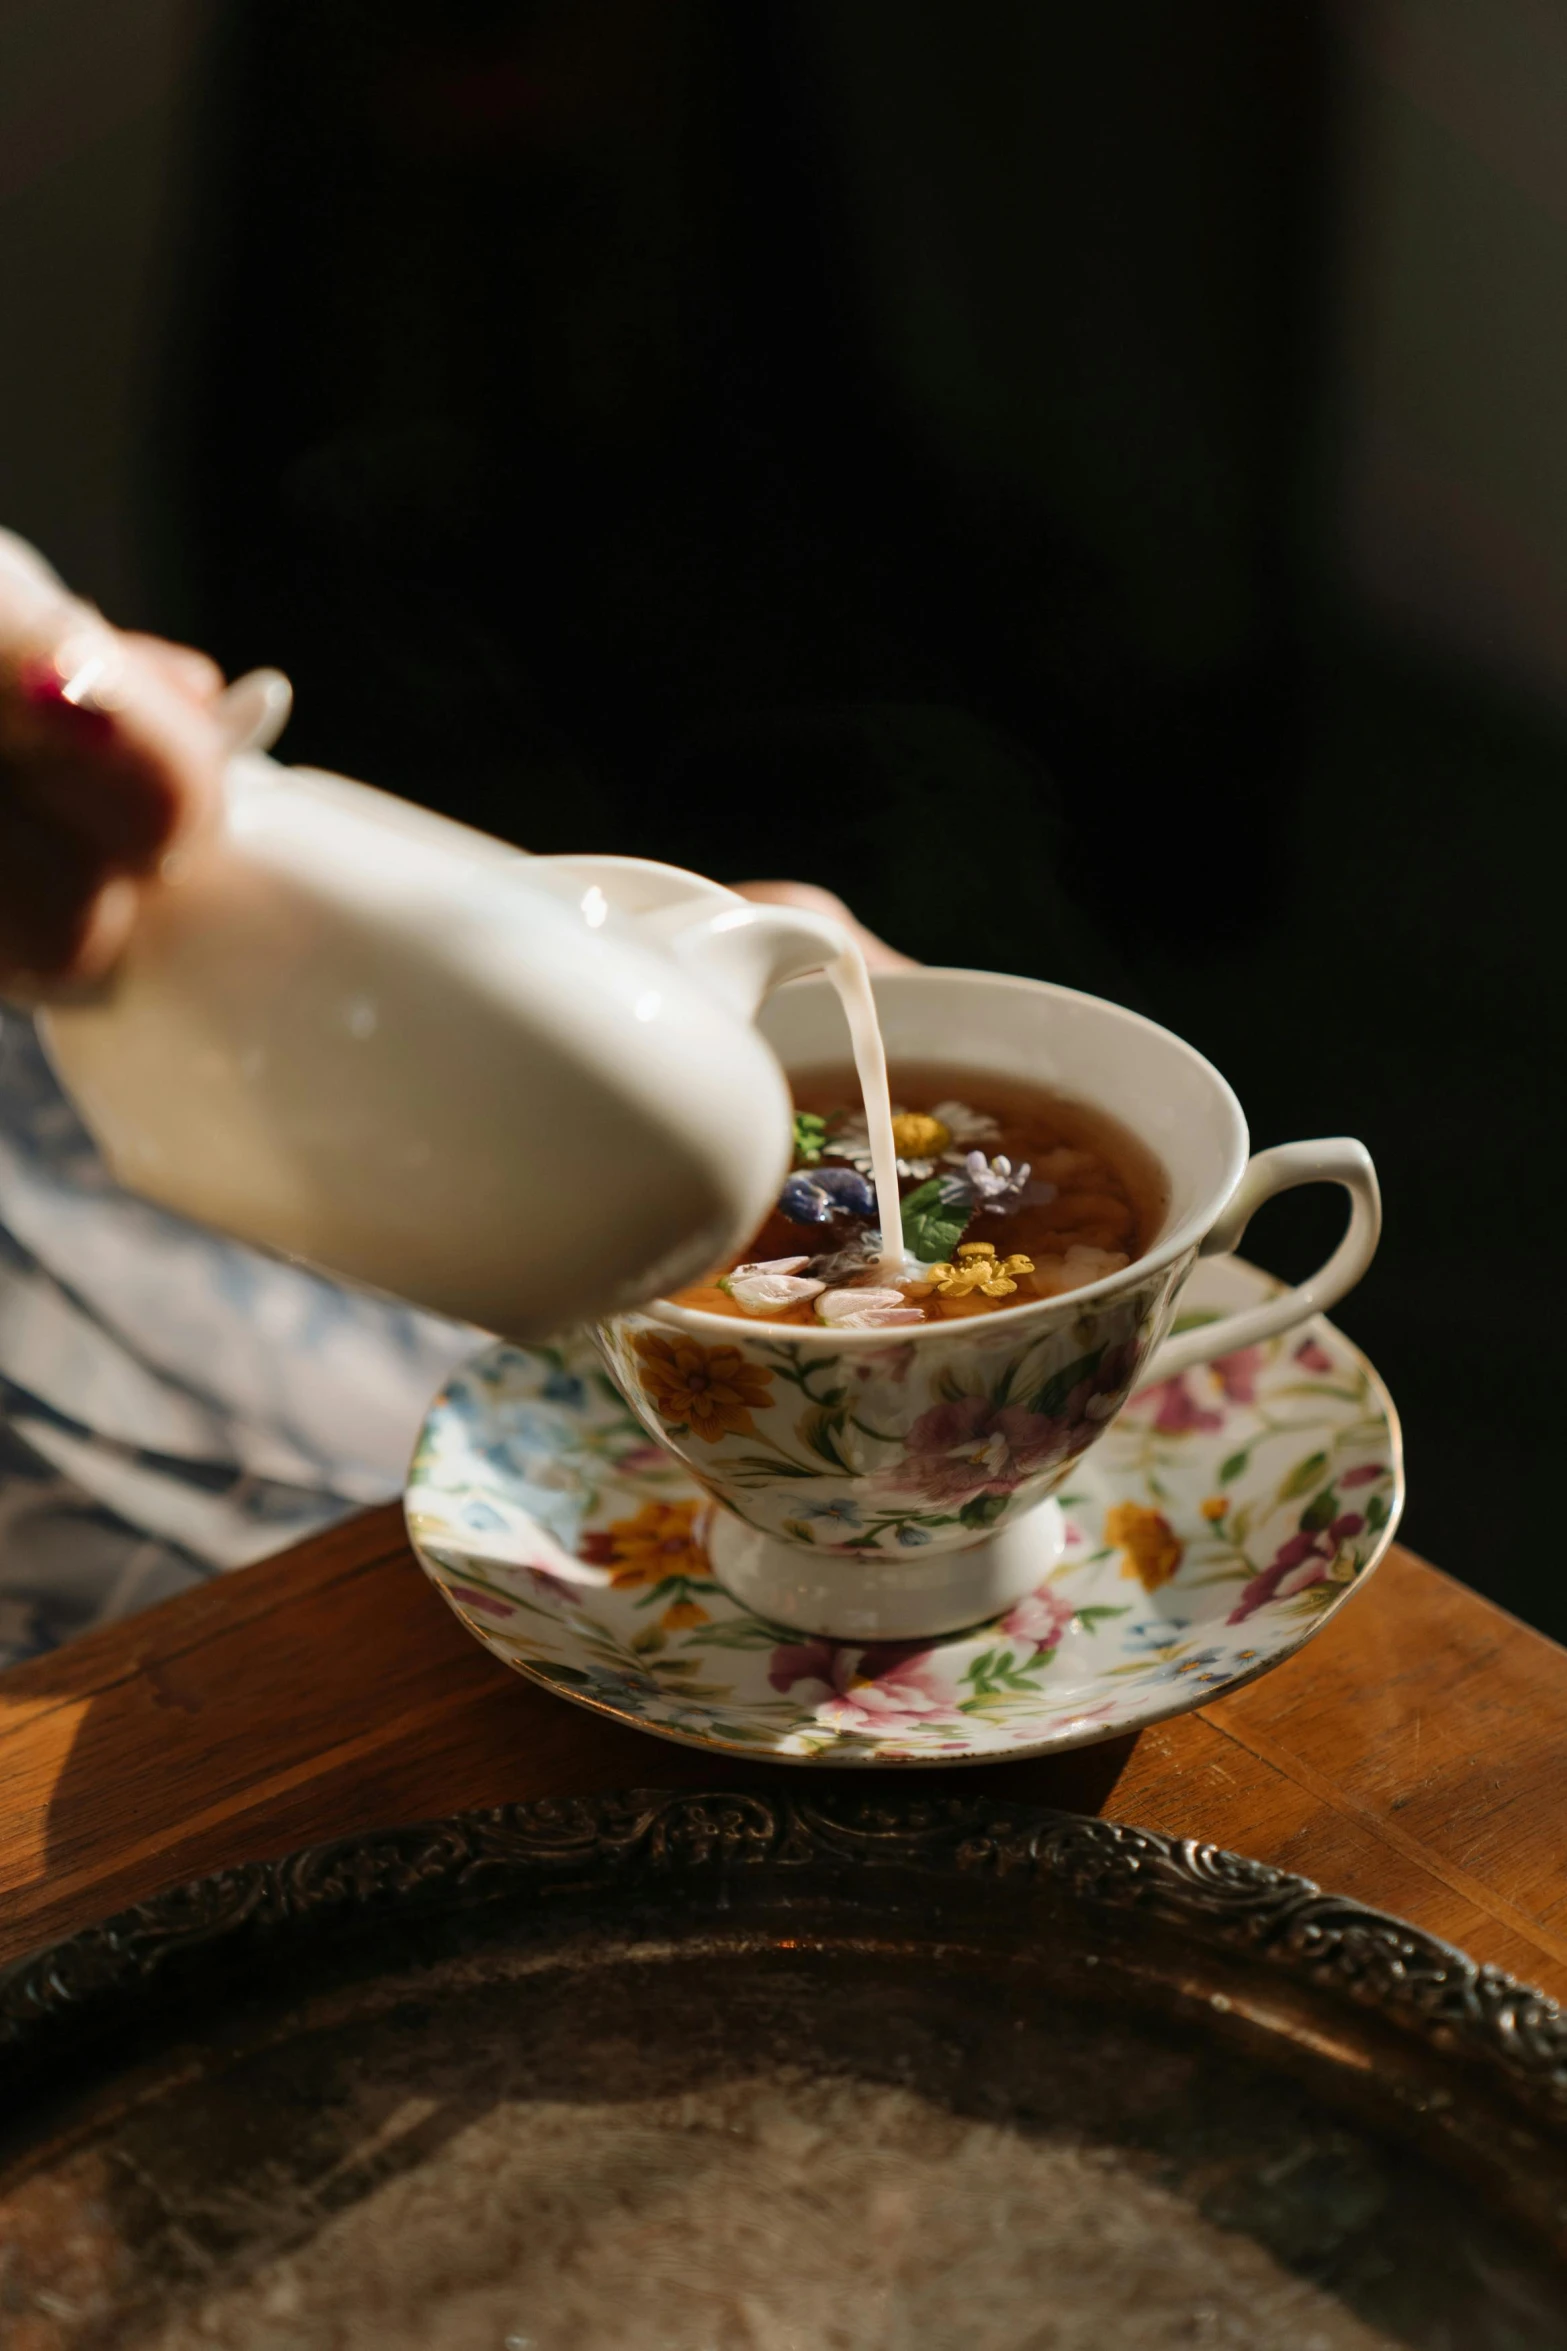 a person pouring something into a cup on a saucer, floral dream, “ iron bark, good soup, vintage vibe